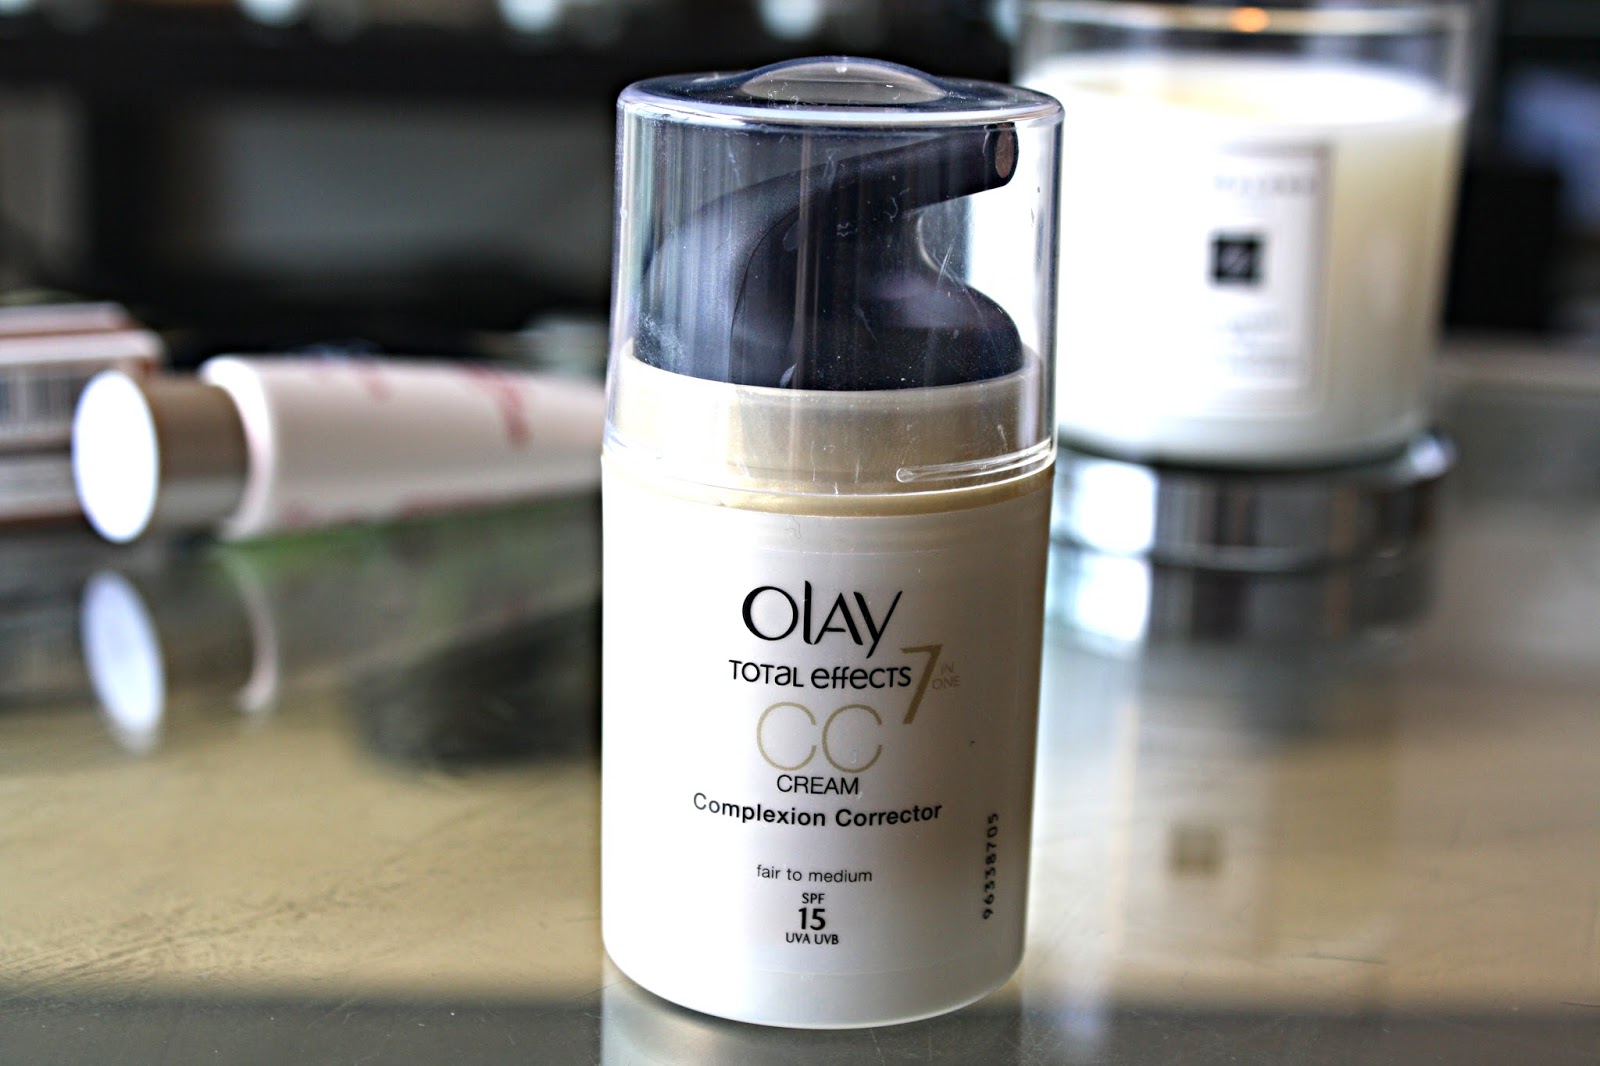 Olay Total Effects CC Cream SPF 15